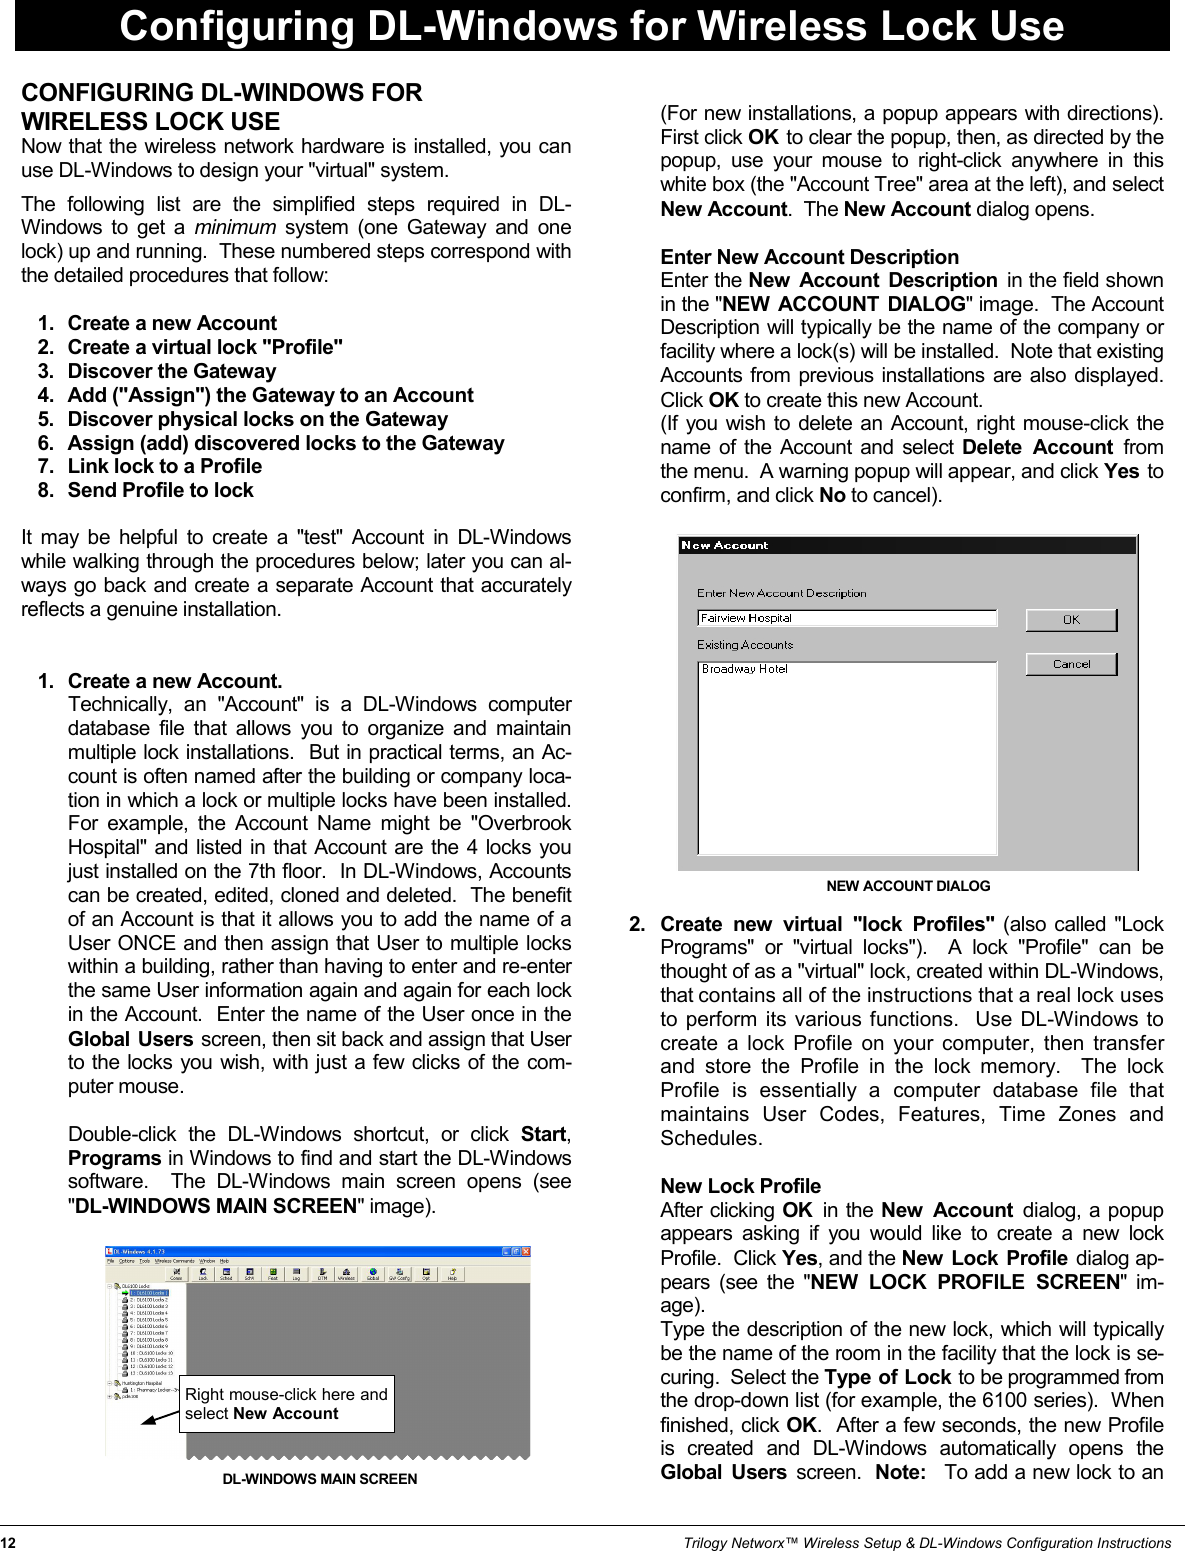 12                                                                                                                                                                 Trilogy Networx™ Wireless Setup &amp; DL-Windows Configuration Instructions CONFIGURING DL-WINDOWS FOR  WIRELESS LOCK USE Now that the wireless network hardware is installed, you can use DL-Windows to design your &quot;virtual&quot; system.    The following list are the simplified steps required in DL-Windows to get a minimum  system (one Gateway and one lock) up and running.  These numbered steps correspond with the detailed procedures that follow:  1.   Create a new Account 2.   Create a virtual lock &quot;Profile&quot; 3.   Discover the Gateway 4.   Add (&quot;Assign&quot;) the Gateway to an Account 5.   Discover physical locks on the Gateway 6.   Assign (add) discovered locks to the Gateway 7.   Link lock to a Profile 8.   Send Profile to lock  It may be helpful to create a &quot;test&quot; Account in DL-Windows while walking through the procedures below; later you can al-ways go back and create a separate Account that accurately reflects a genuine installation.   1.   Create a new Account.         Technically, an &quot;Account&quot; is a DL-Windows computer database file that allows you to organize and maintain multiple lock installations.  But in practical terms, an Ac-count is often named after the building or company loca-tion in which a lock or multiple locks have been installed.  For example, the Account Name might be &quot;Overbrook Hospital&quot; and listed in that Account are the 4 locks you just installed on the 7th floor.  In DL-Windows, Accounts can be created, edited, cloned and deleted.  The benefit of an Account is that it allows you to add the name of a User ONCE and then assign that User to multiple locks within a building, rather than having to enter and re-enter the same User information again and again for each lock in the Account.  Enter the name of the User once in the Global Users screen, then sit back and assign that User to the locks you wish, with just a few clicks of the com-puter mouse.        Double-click the DL-Windows shortcut, or click Start, Programs in Windows to find and start the DL-Windows software.  The DL-Windows main screen opens (see &quot;DL-WINDOWS MAIN SCREEN&quot; image).                    (For new installations, a popup appears with directions).  First click OK  to clear the popup, then, as directed by the popup, use your mouse to right-click anywhere in this white box (the &quot;Account Tree&quot; area at the left), and select New Account.  The New Account dialog opens.         Enter New Account Description        Enter the New Account Description in the field shown in the &quot;NEW ACCOUNT DIALOG&quot; image.  The Account Description will typically be the name of the company or facility where a lock(s) will be installed.  Note that existing Accounts from previous installations are also displayed.  Click OK to create this new Account.       (If you wish to delete an Account, right mouse-click the name of the Account and select Delete Account from the menu.  A warning popup will appear, and click Yes  to confirm, and click No to cancel).                  2.   Create new virtual &quot;lock Profiles&quot; (also called &quot;Lock Programs&quot; or &quot;virtual locks&quot;).  A lock &quot;Profile&quot; can be thought of as a &quot;virtual&quot; lock, created within DL-Windows, that contains all of the instructions that a real lock uses to perform its various functions.  Use DL-Windows to create a lock Profile on your computer, then transfer and store the Profile in the lock memory.  The lock Profile is essentially a computer database file that maintains User Codes, Features, Time Zones and Schedules.           New Lock Profile        After clicking OK  in the New Account dialog, a popup appears asking if you would like to create a new lock Profile.  Click Yes, and the New Lock Profile dialog ap-pears (see the &quot;NEW LOCK PROFILE SCREEN&quot; im-age).         Type the description of the new lock, which will typically be the name of the room in the facility that the lock is se-curing.  Select the Type of Lock to be programmed from the drop-down list (for example, the 6100 series).  When finished, click OK.  After a few seconds, the new Profile is created and DL-Windows automatically opens the Global Users screen.  Note:  To add a new lock to an NEW ACCOUNT DIALOG Configuring DL-Windows for Wireless Lock Use Right mouse-click here and select New Account DL-WINDOWS MAIN SCREEN 